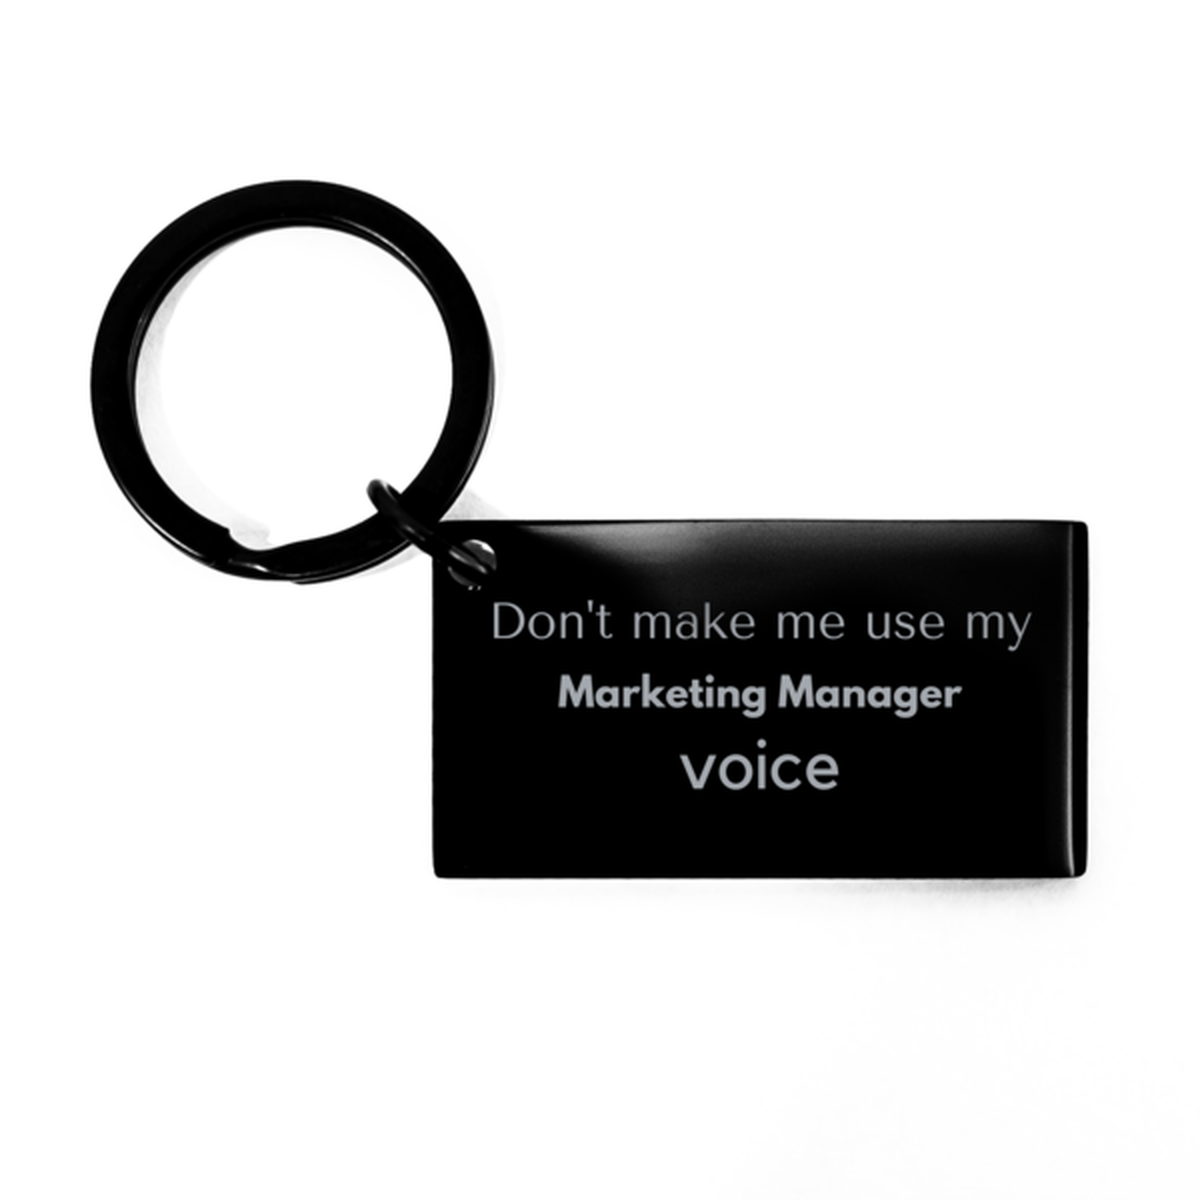 Don't make me use my Marketing Manager voice, Sarcasm Marketing Manager Gifts, Christmas Marketing Manager Keychain Birthday Unique Gifts For Marketing Manager Coworkers, Men, Women, Colleague, Friends